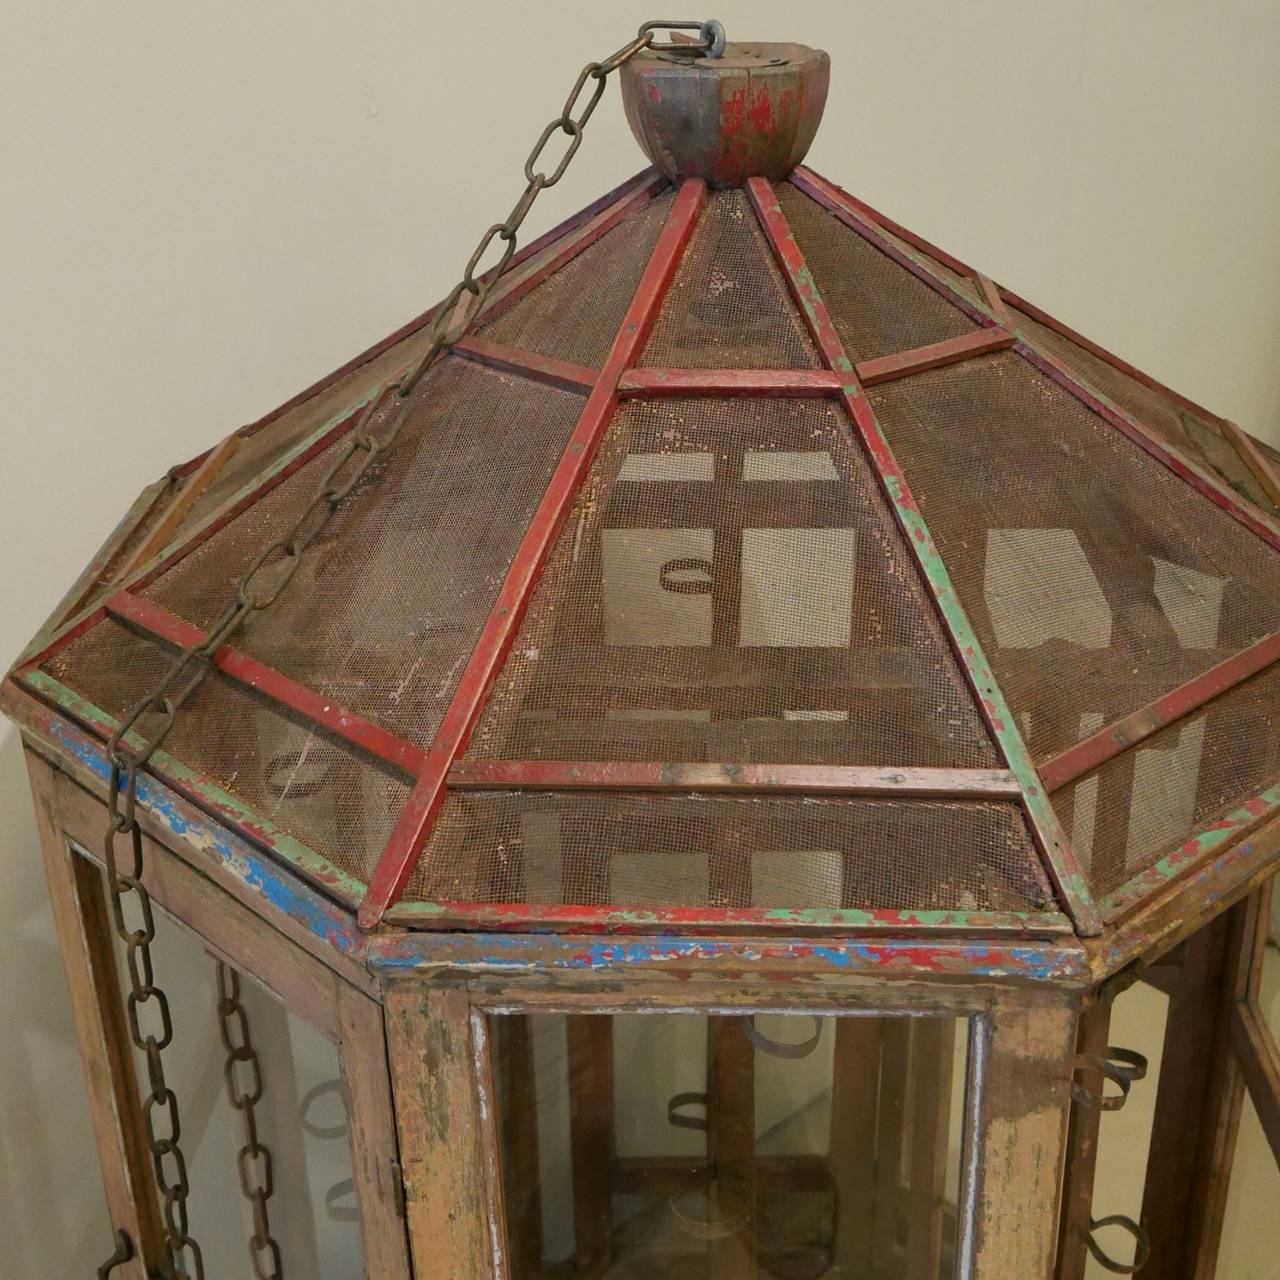 A painted vintage Indian prayer cabinet that was used in temples. This unusual piece can hold 48 candles - there are eight wooden posts that hold six tea light candles on each post, accessible by four of the glazed doors.